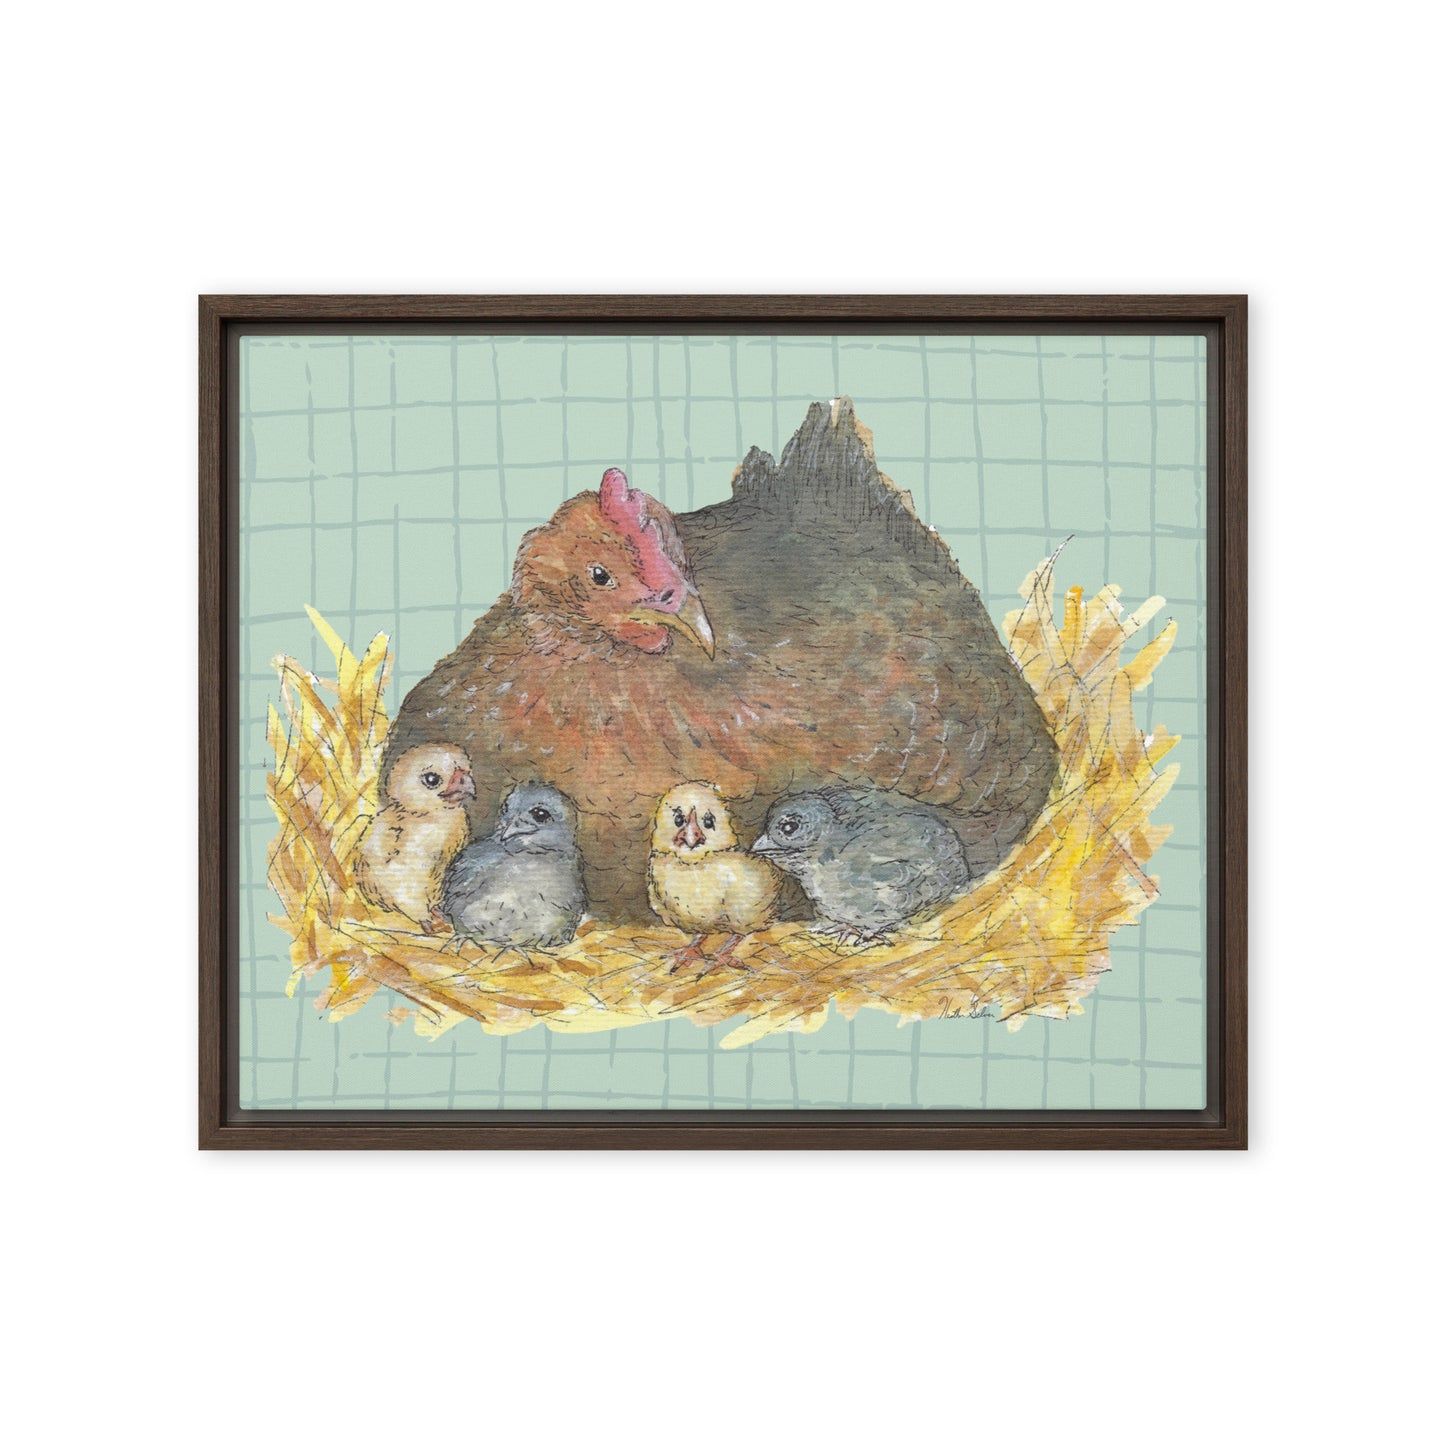 16 by 20 inch Mother Hen Floating Frame Canvas Wall Art. Heather Silver's watercolor painting, Mother Hen, with a green crosshatched background, printed on a stretched canvas and framed with a dark brown pine frame. Hanging hardware included.